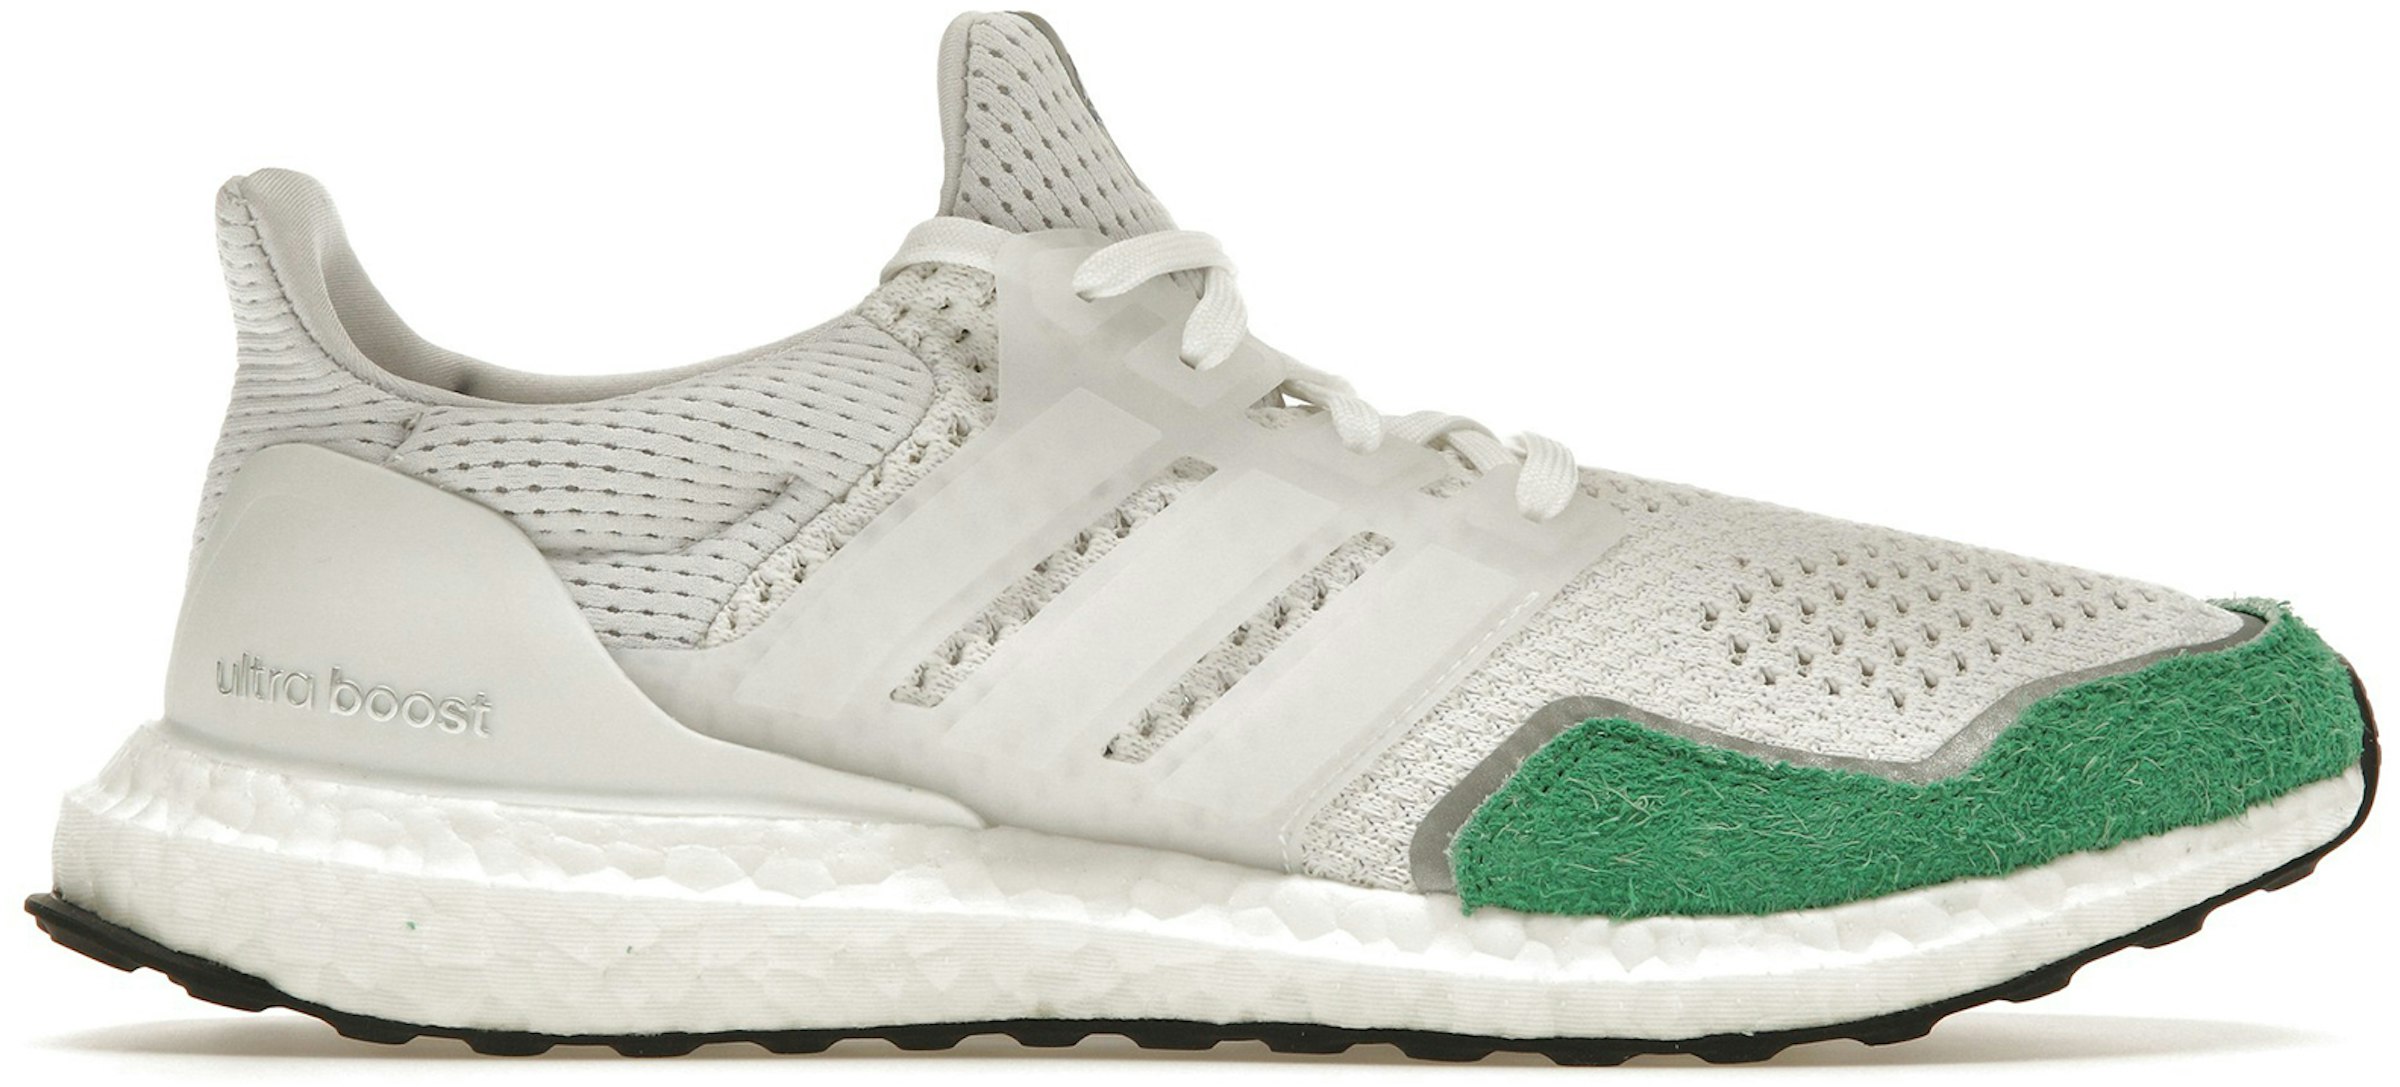 adidas Ultra Boost 1.0 Cloud White Green GY9134 - US